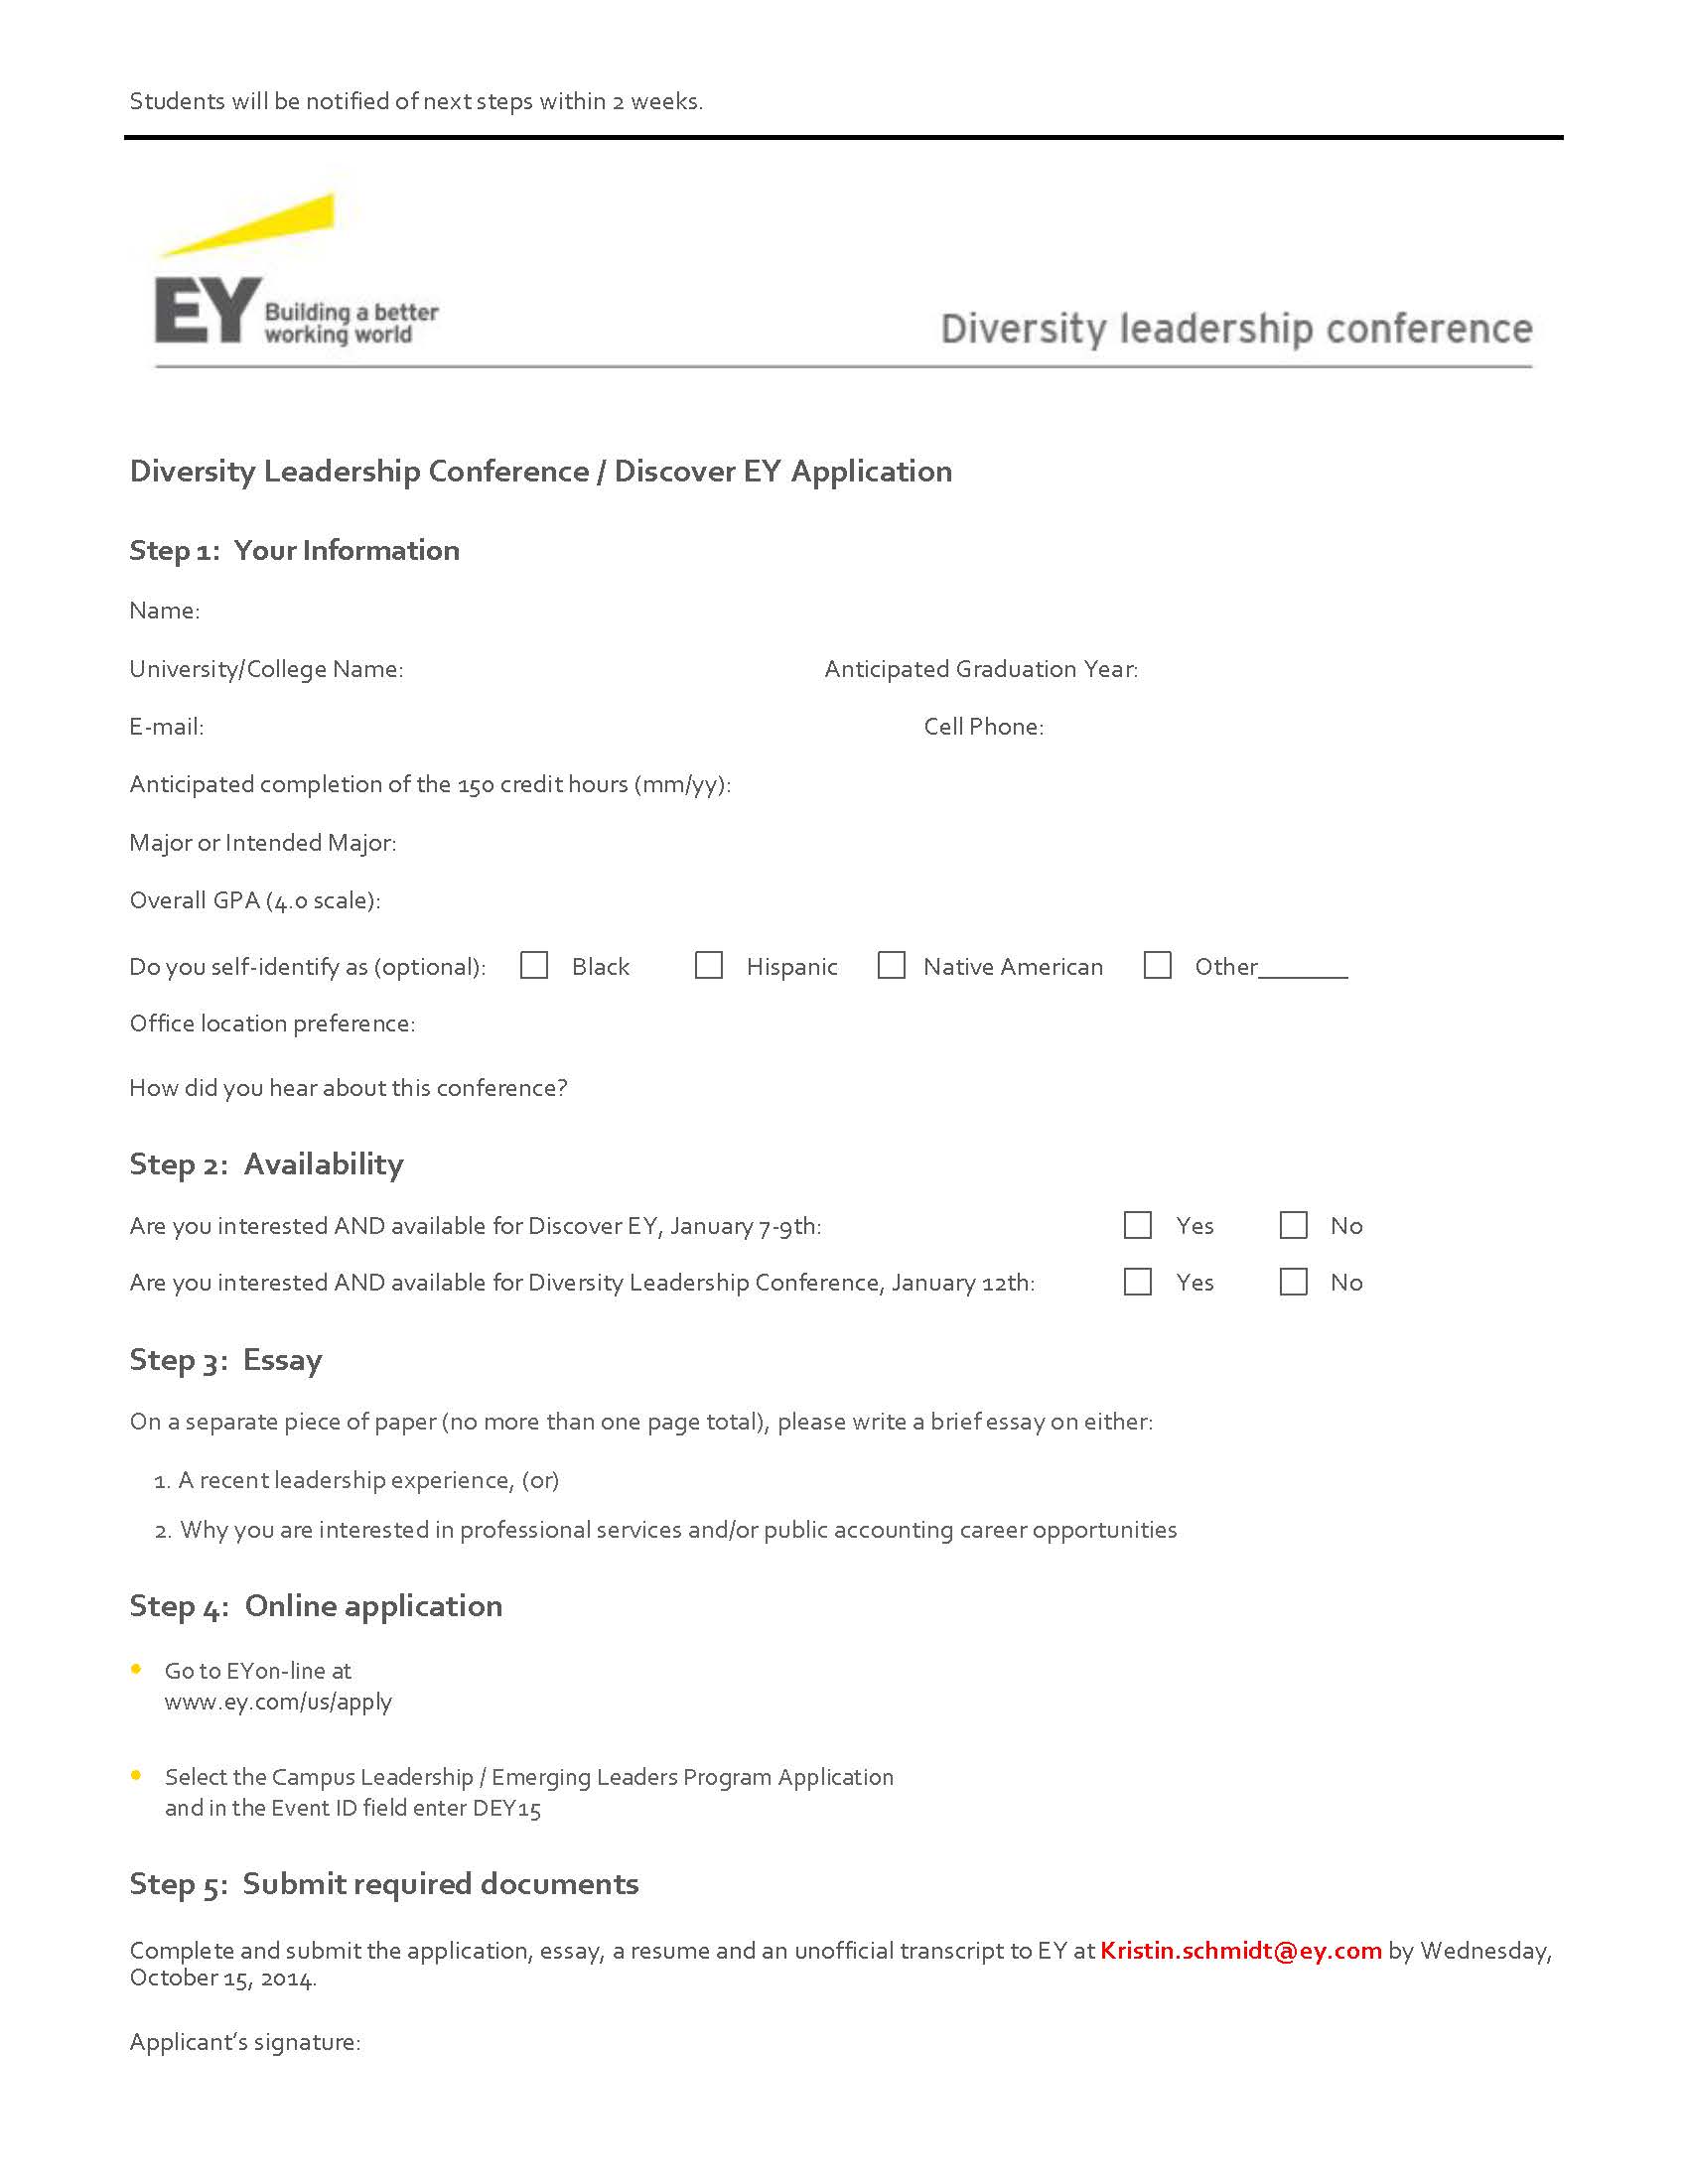 ernst-young-s-diversity-leadership-conference-application-deadline-of-october-15-college-of